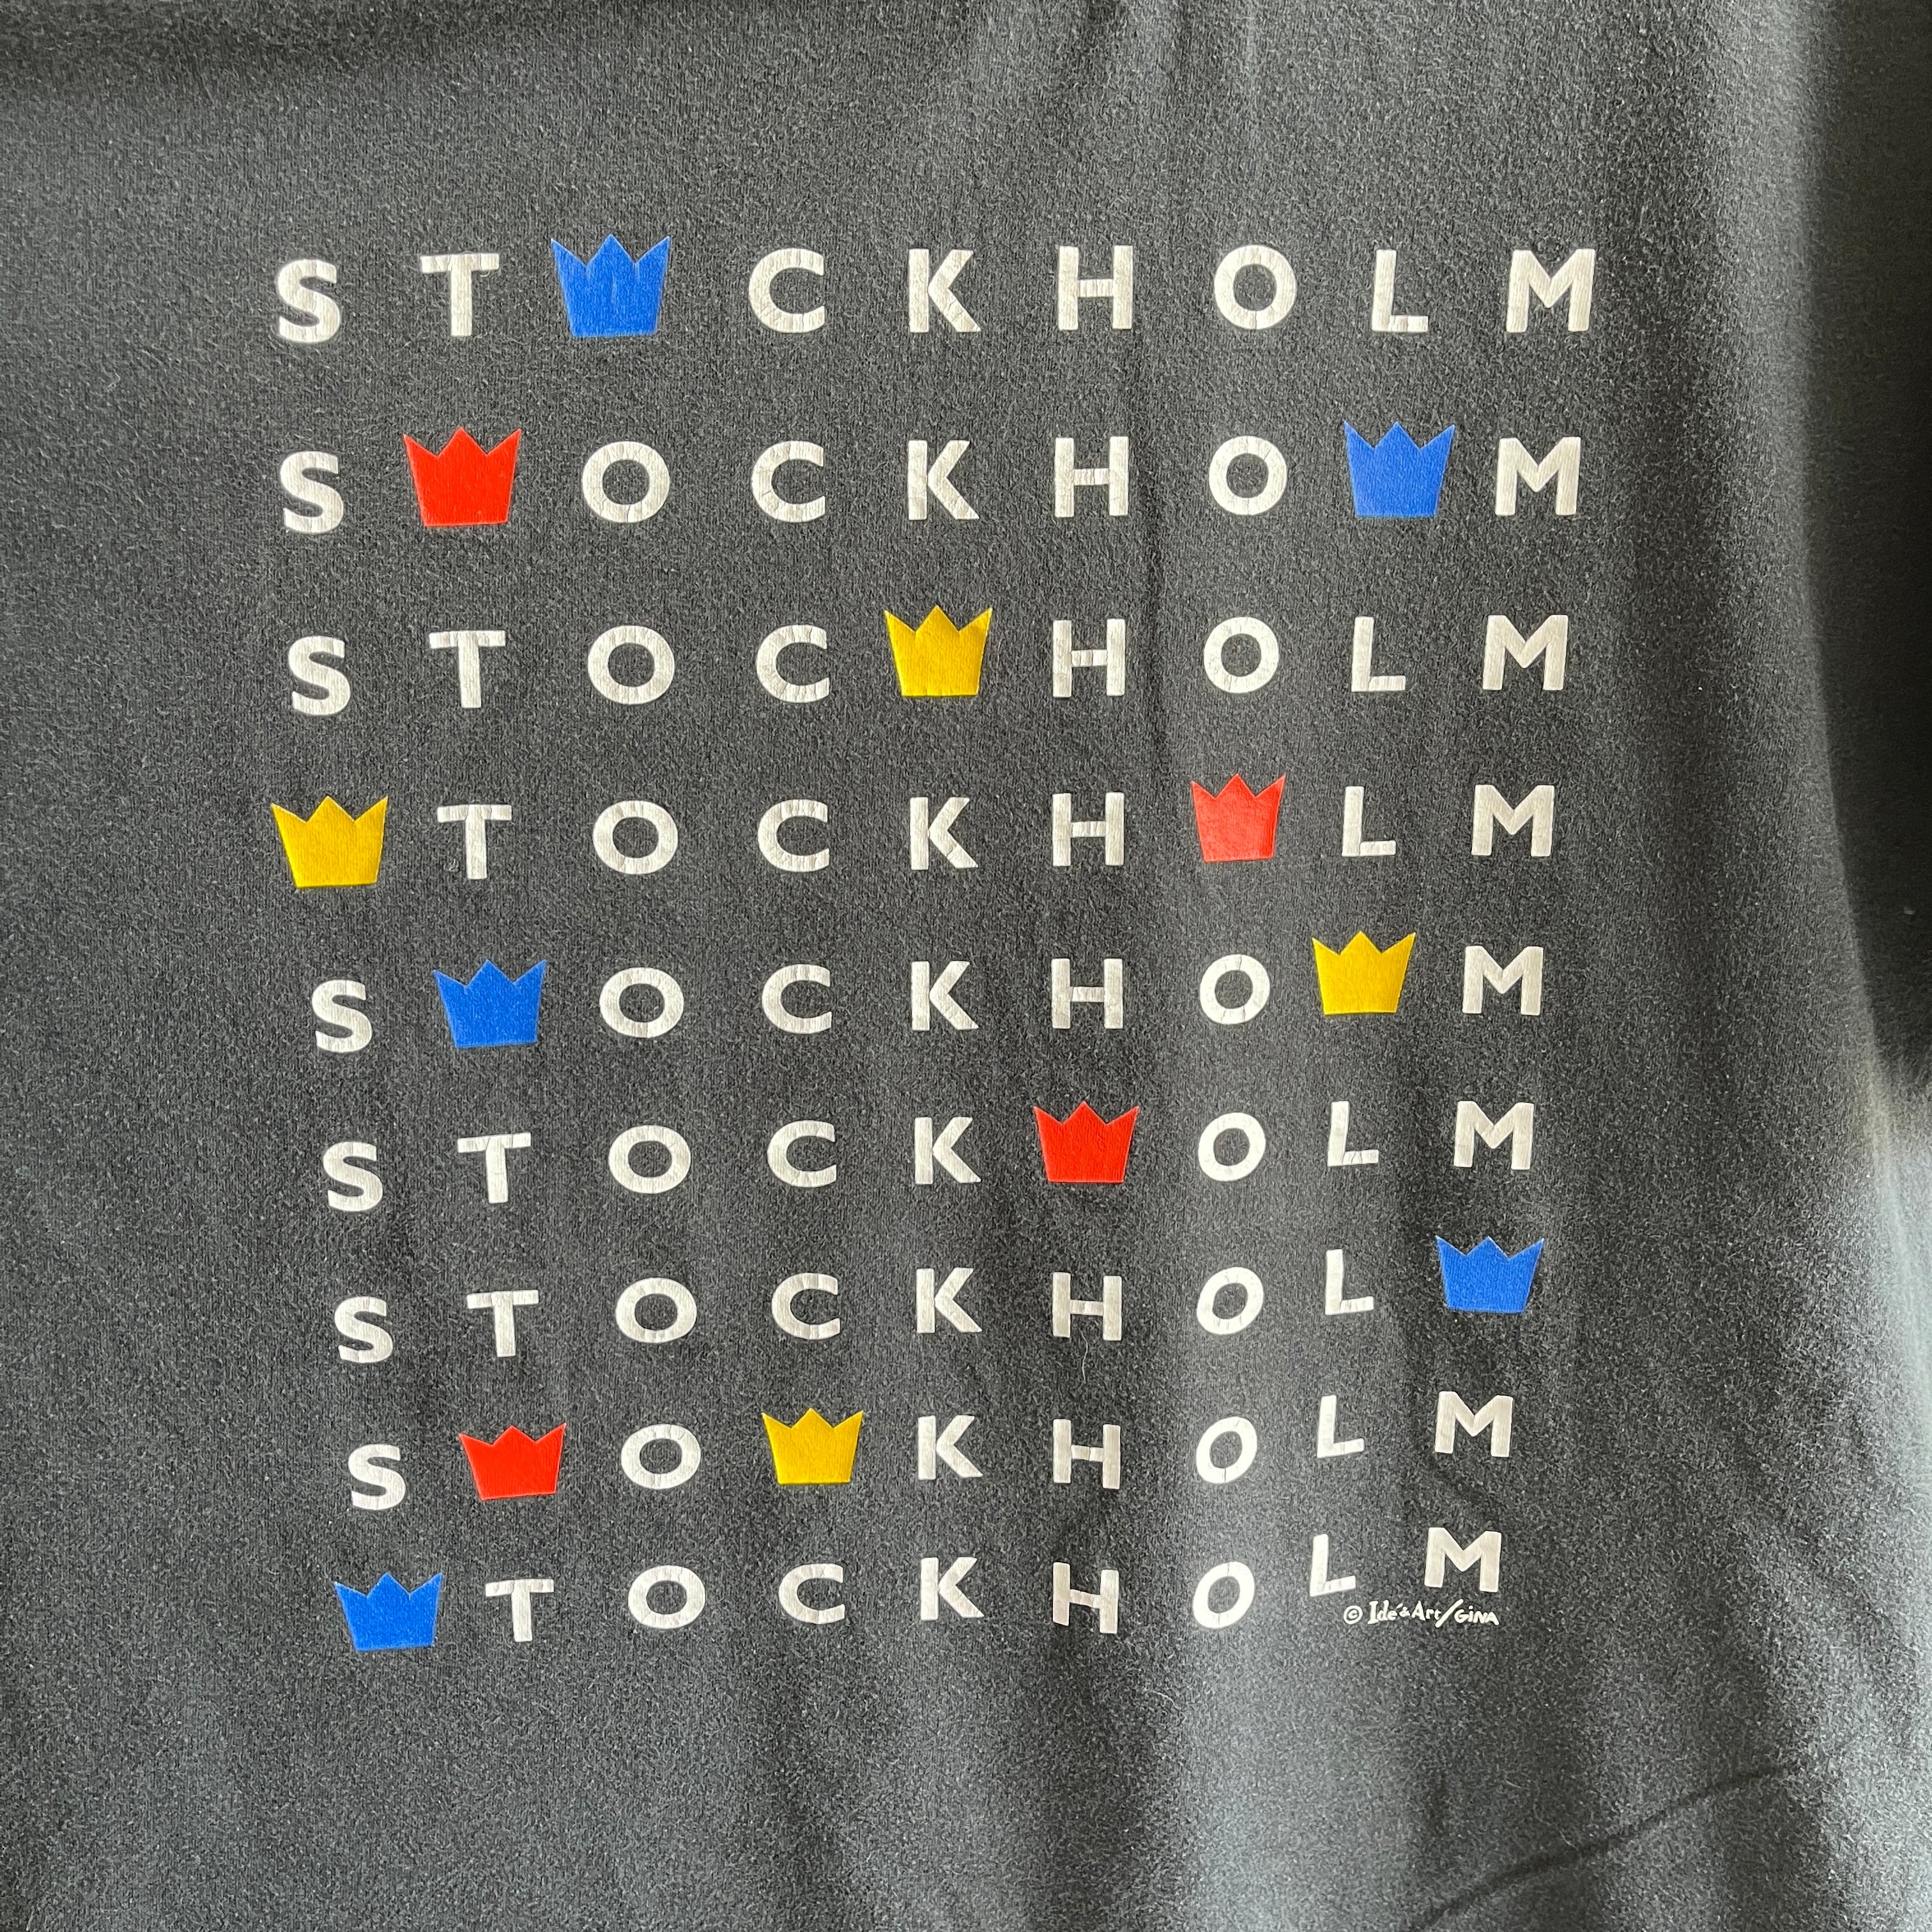 1990/00s Stockholm Graphic T-Shirt - Made in Korea